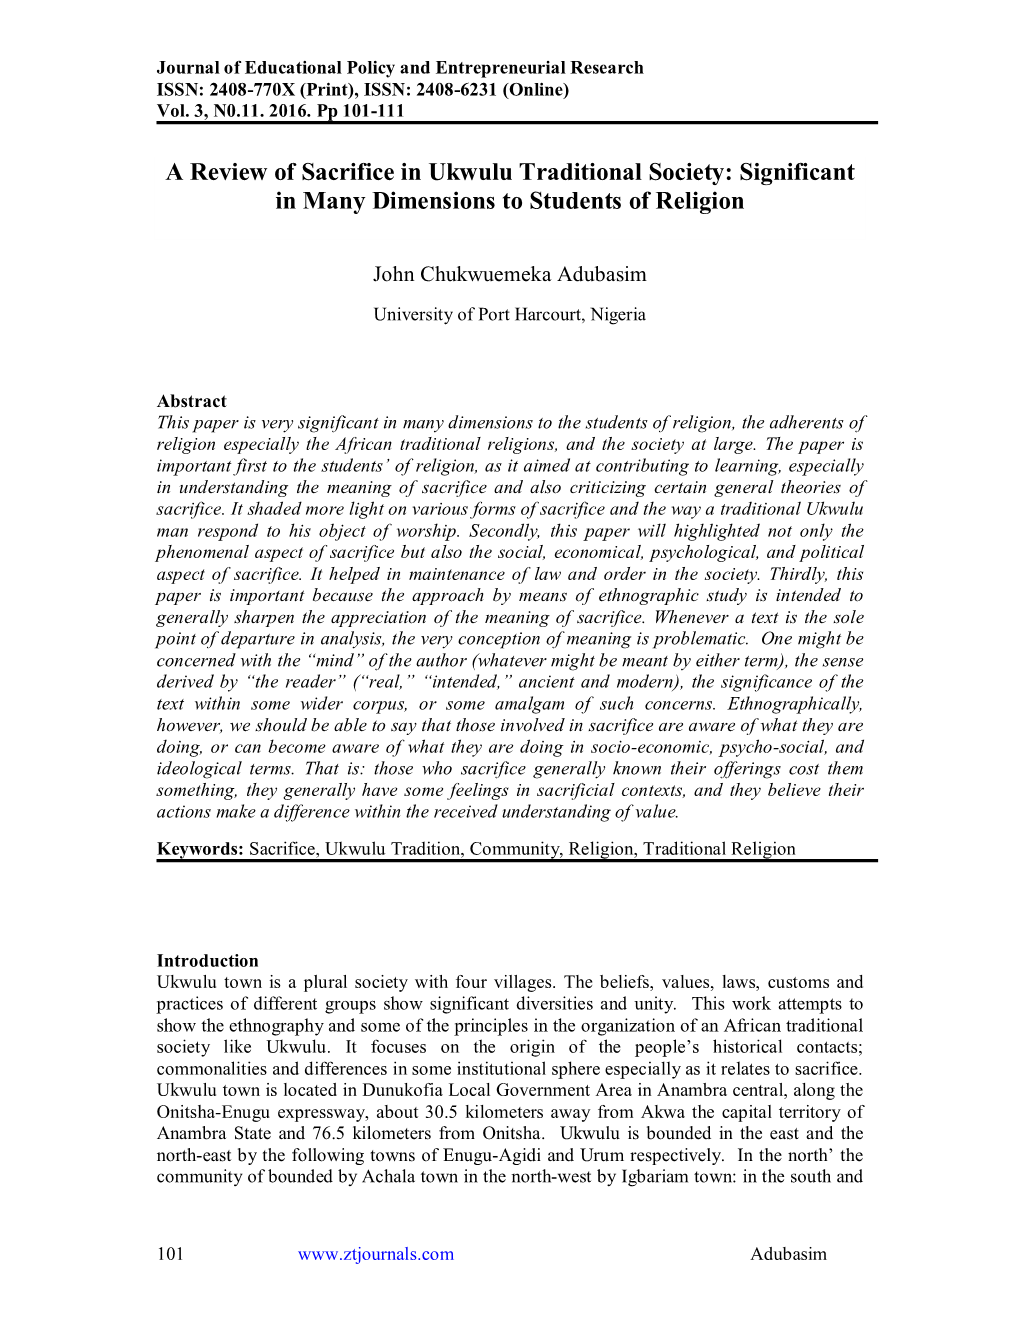 A Review of Sacrifice in Ukwulu Traditional Society: Significant in Many Dimensions to Students of Religion